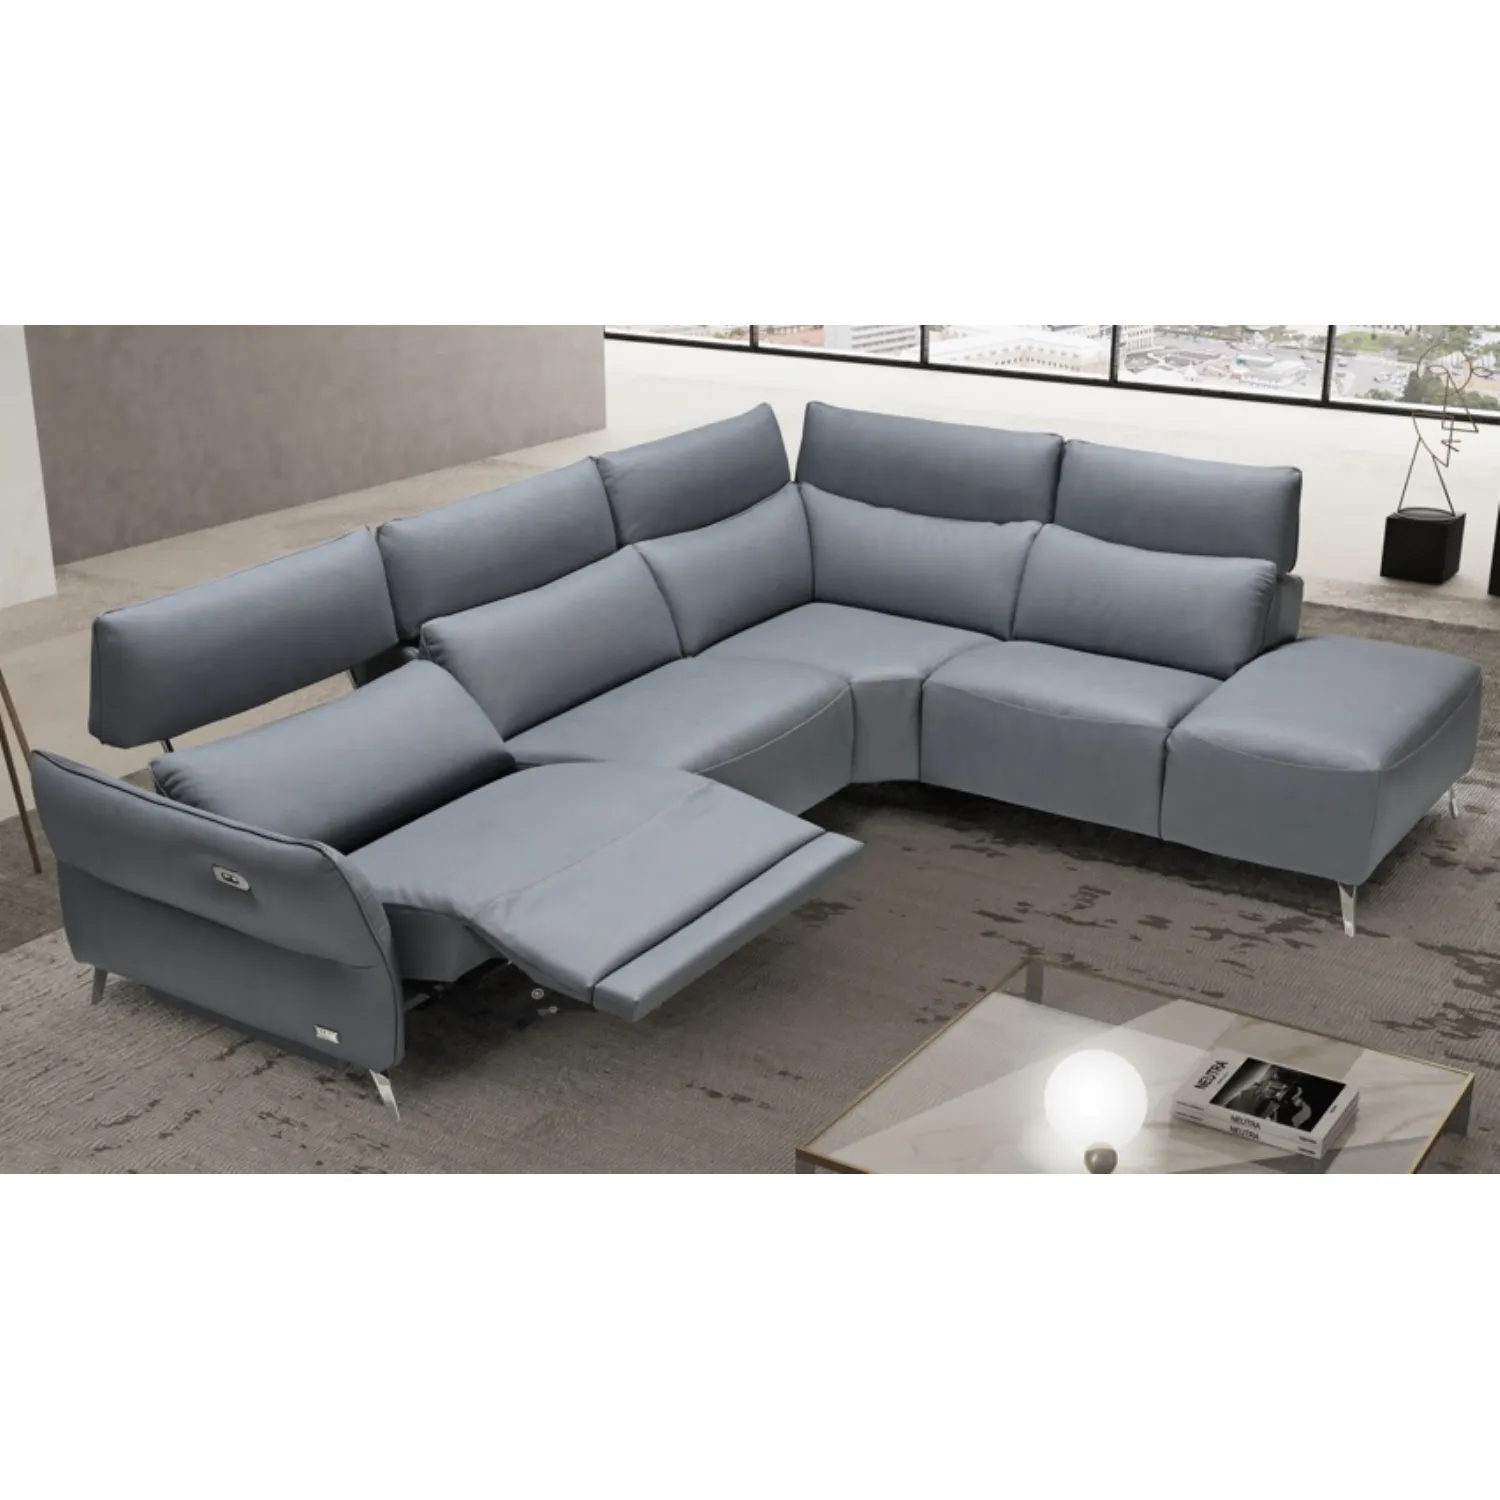 Grey Italian Leather Electric Corner Sofa with Chaise End